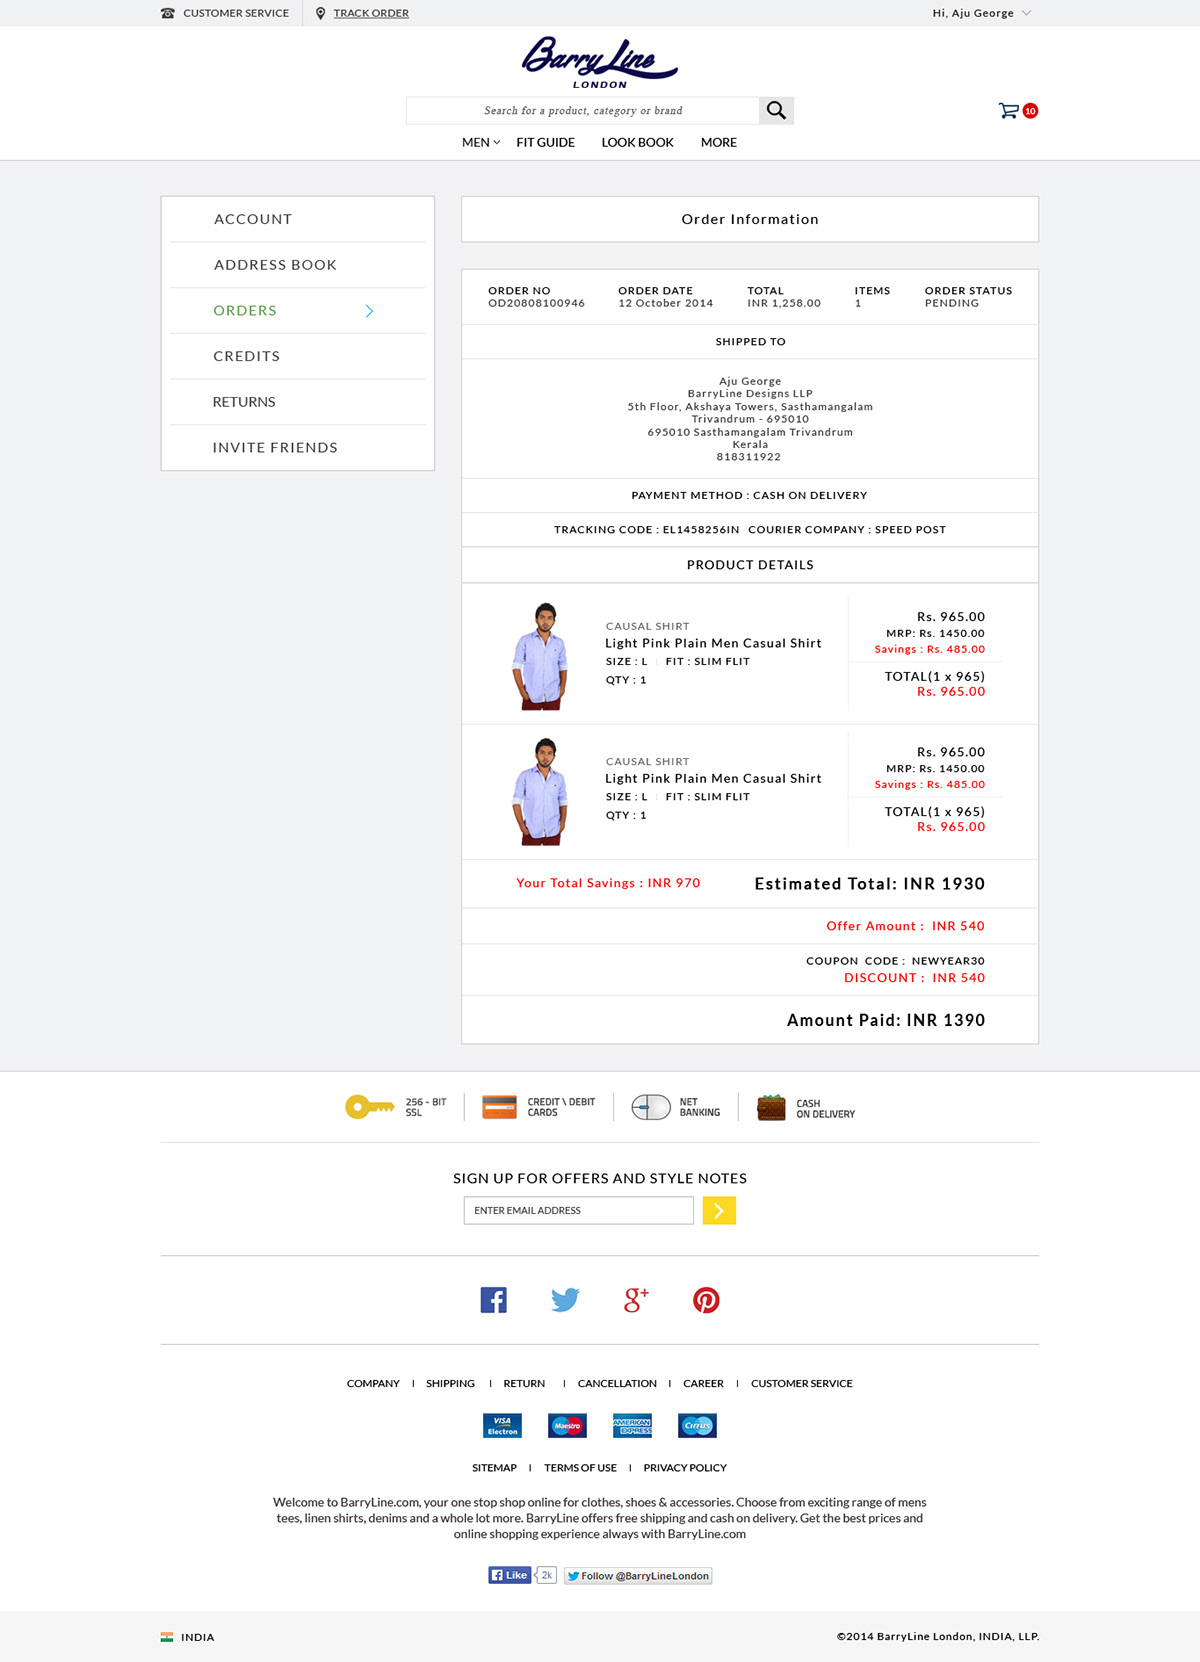 BarryLine user interface Ecommerce online shopping site fashion website user experience UI ux